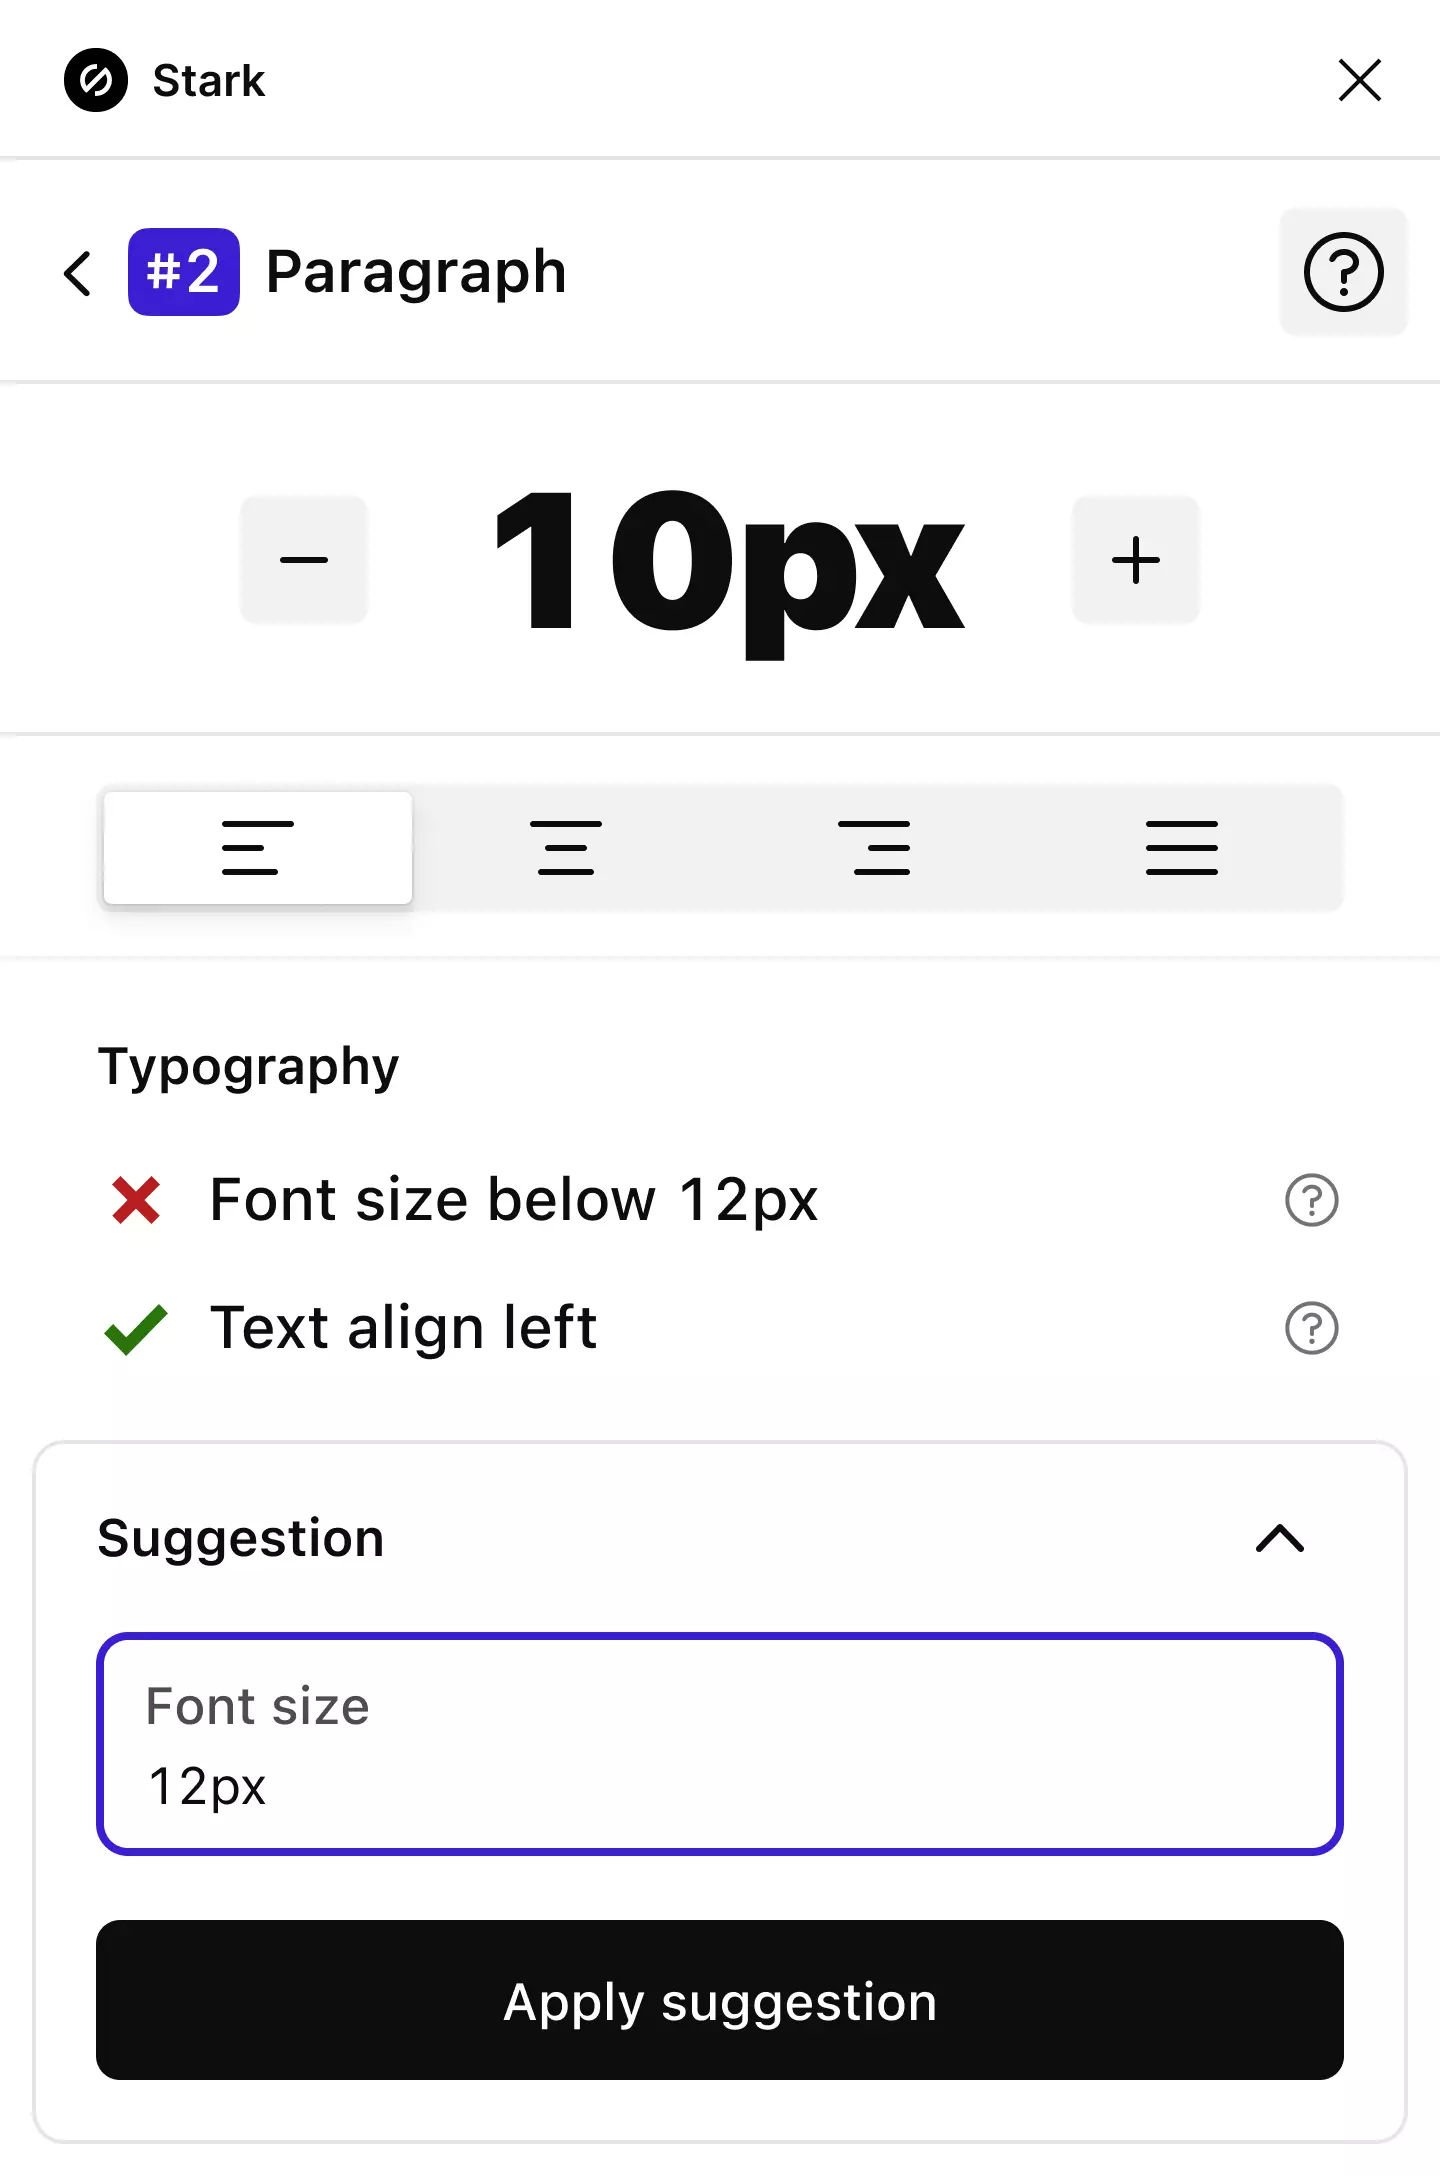 The Stark Typography analyzer showing font details for a design component with options to remedy it by increasing the size.